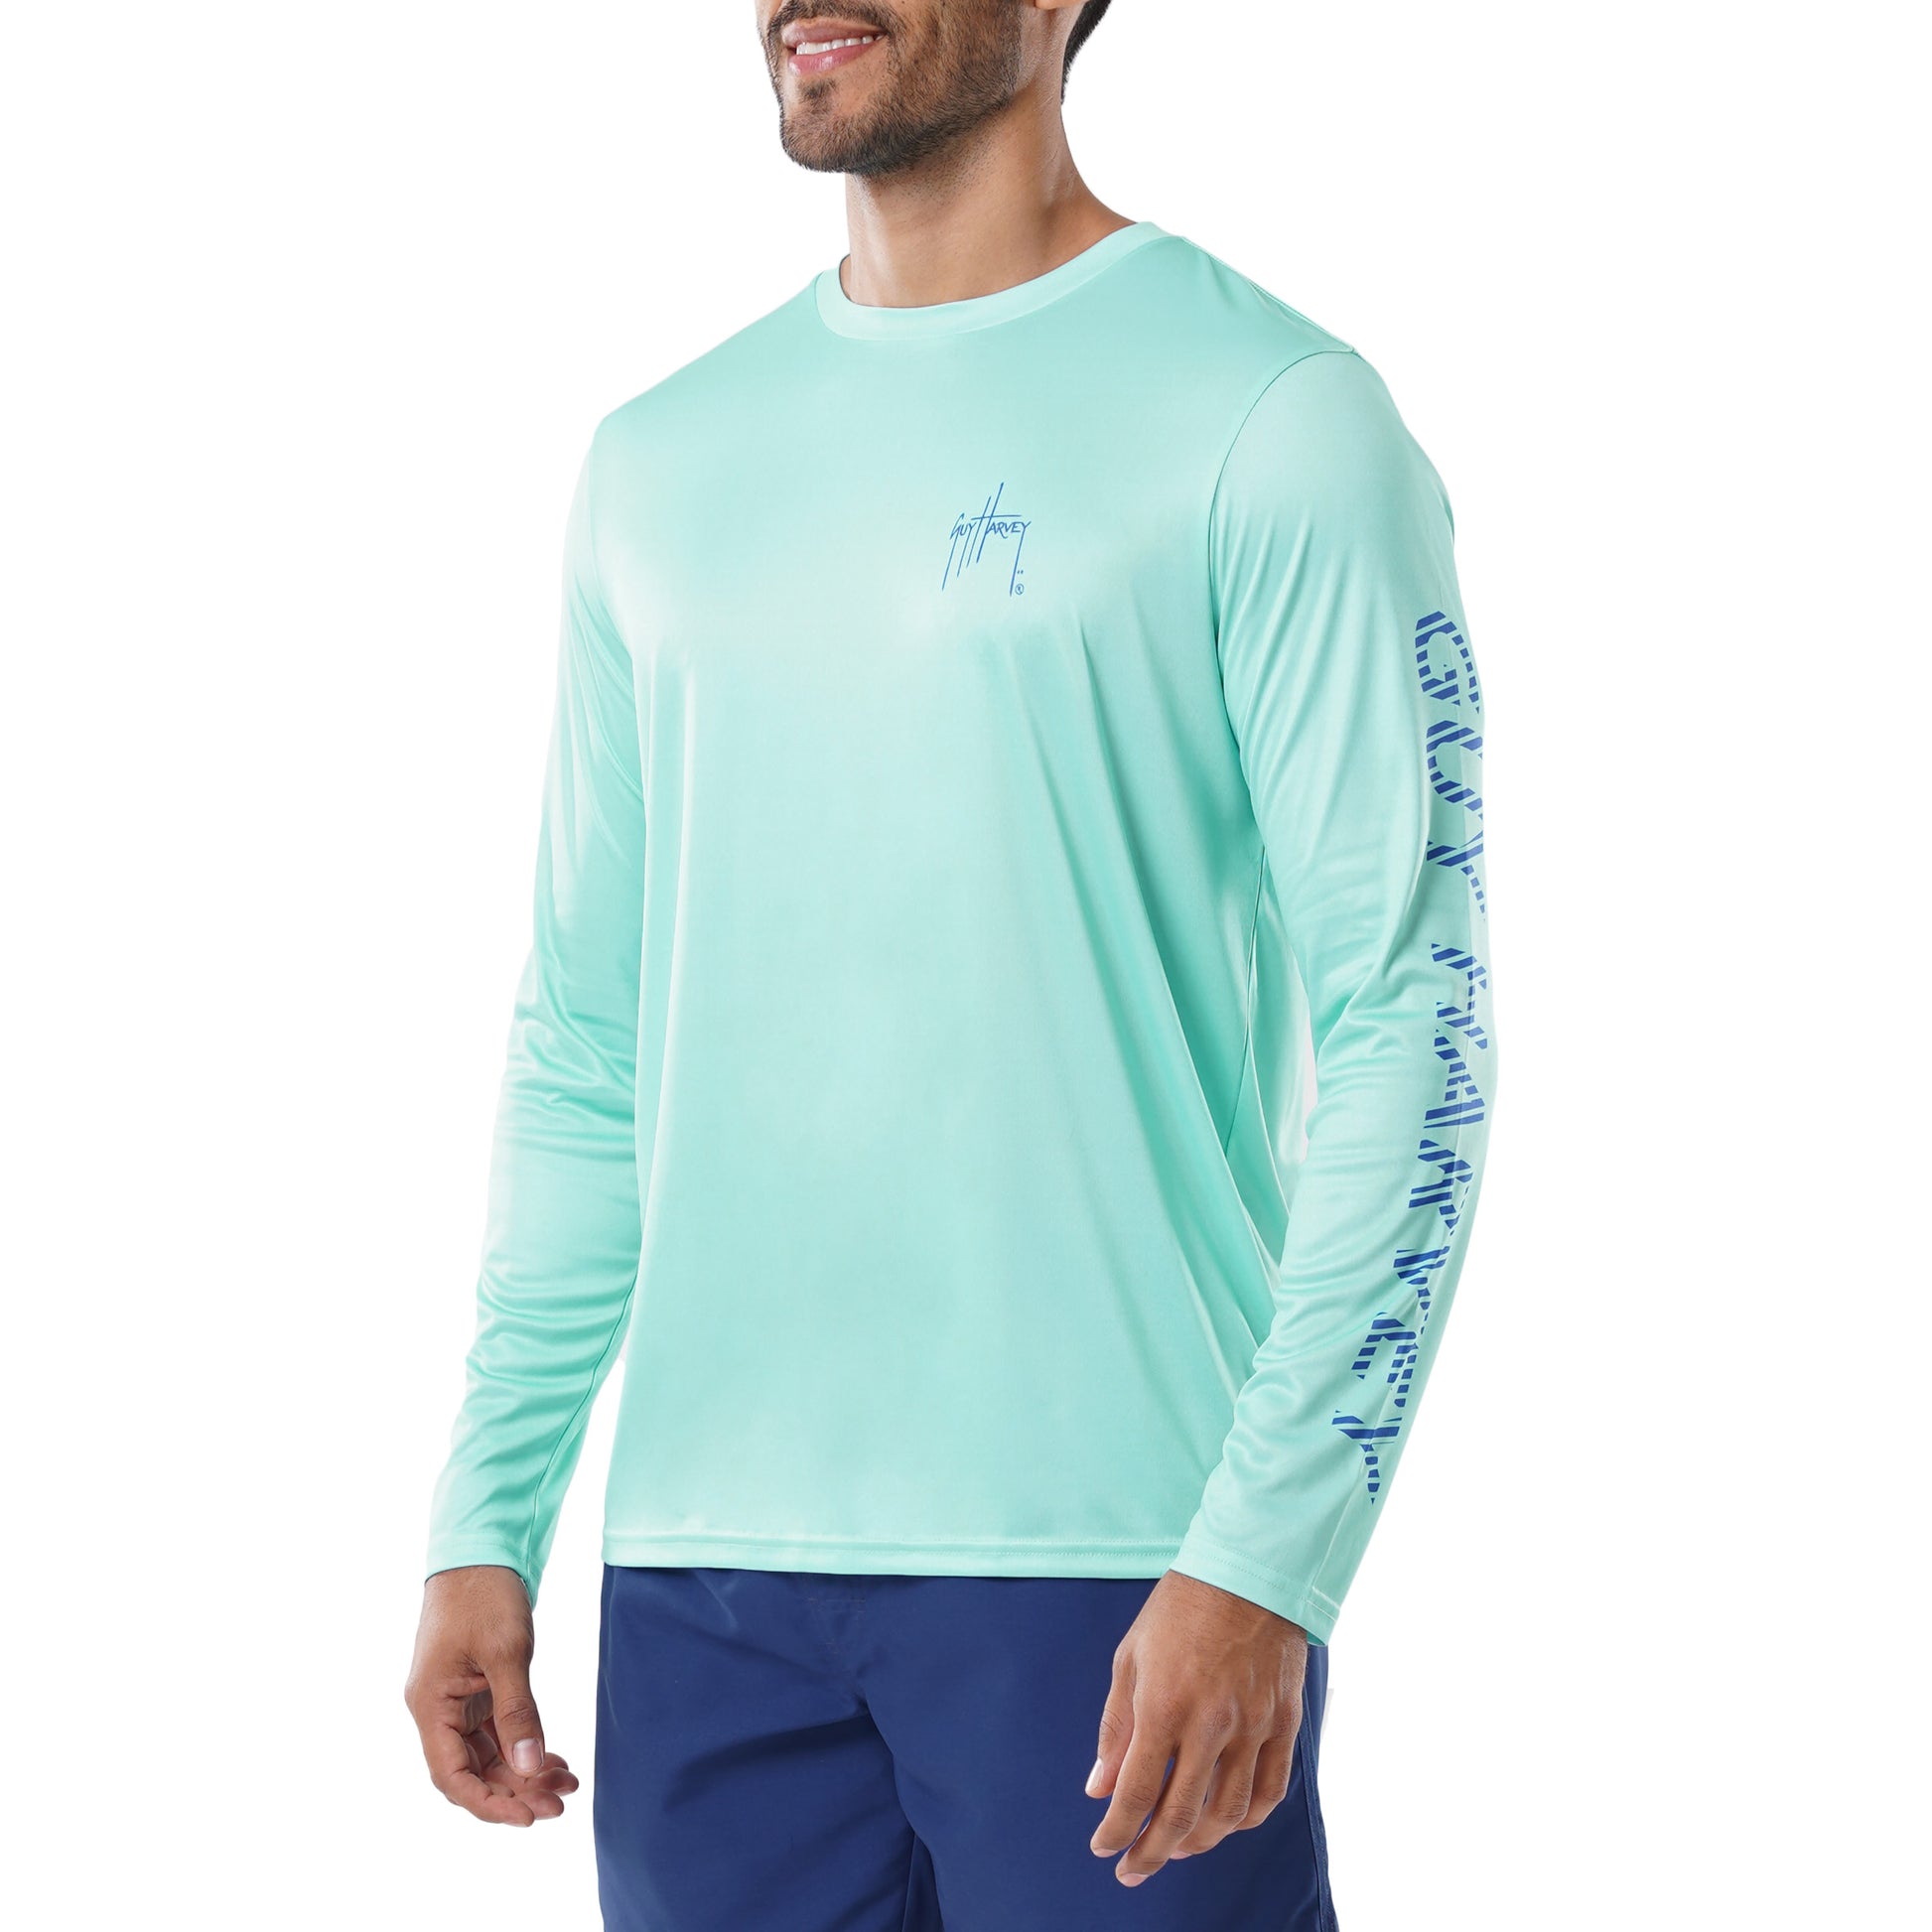 Men's Offshore Fishing Performance Sun Protection Top View 4